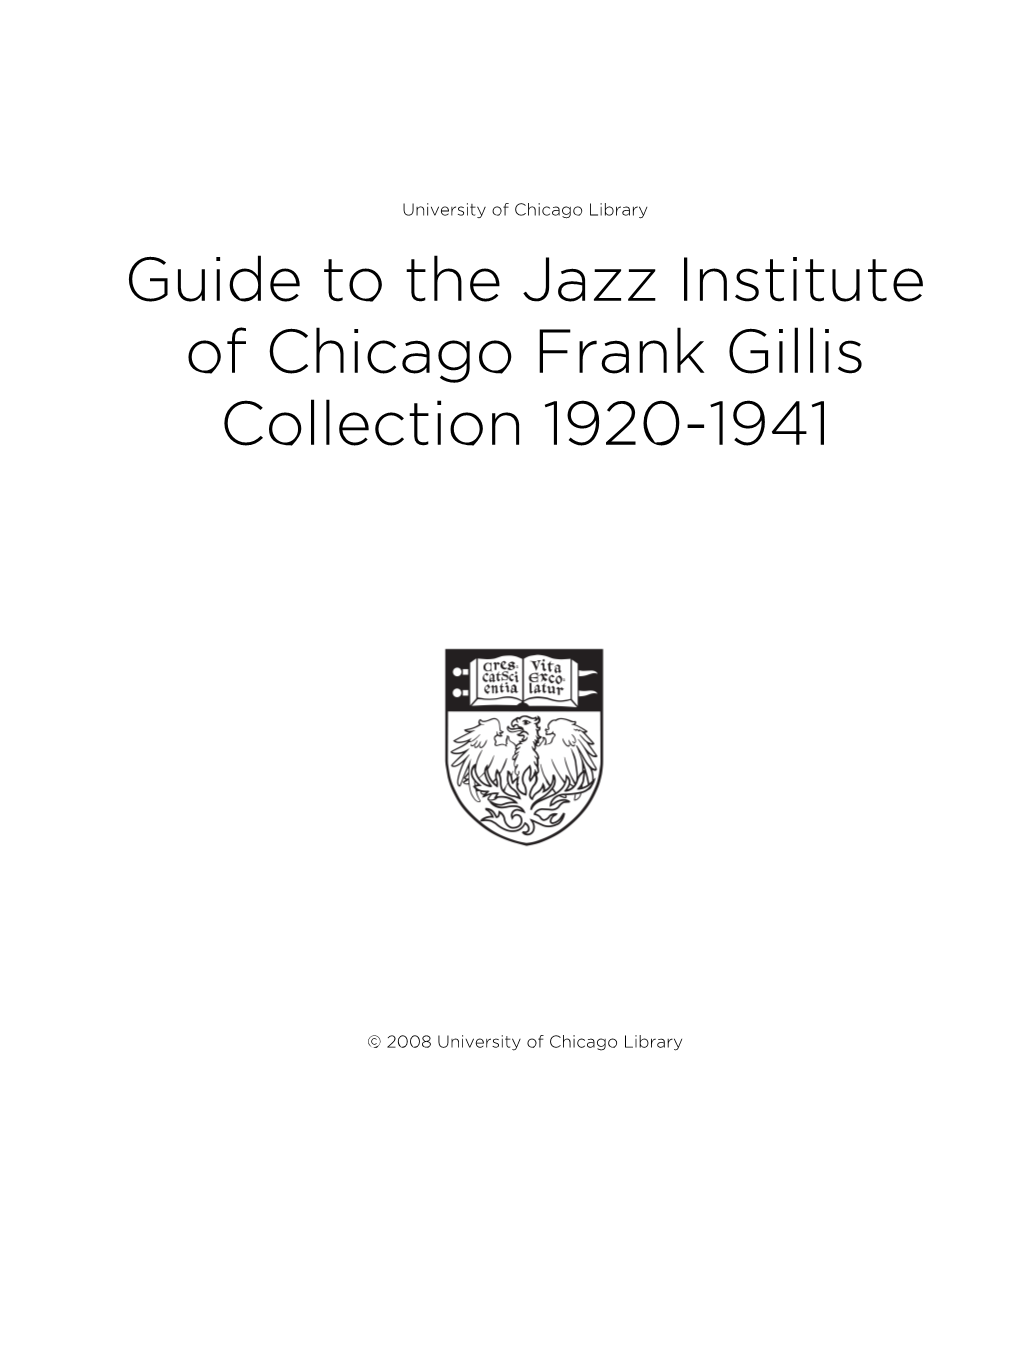 Guide to the Jazz Institute of Chicago Frank Gillis Collection 1920-1941